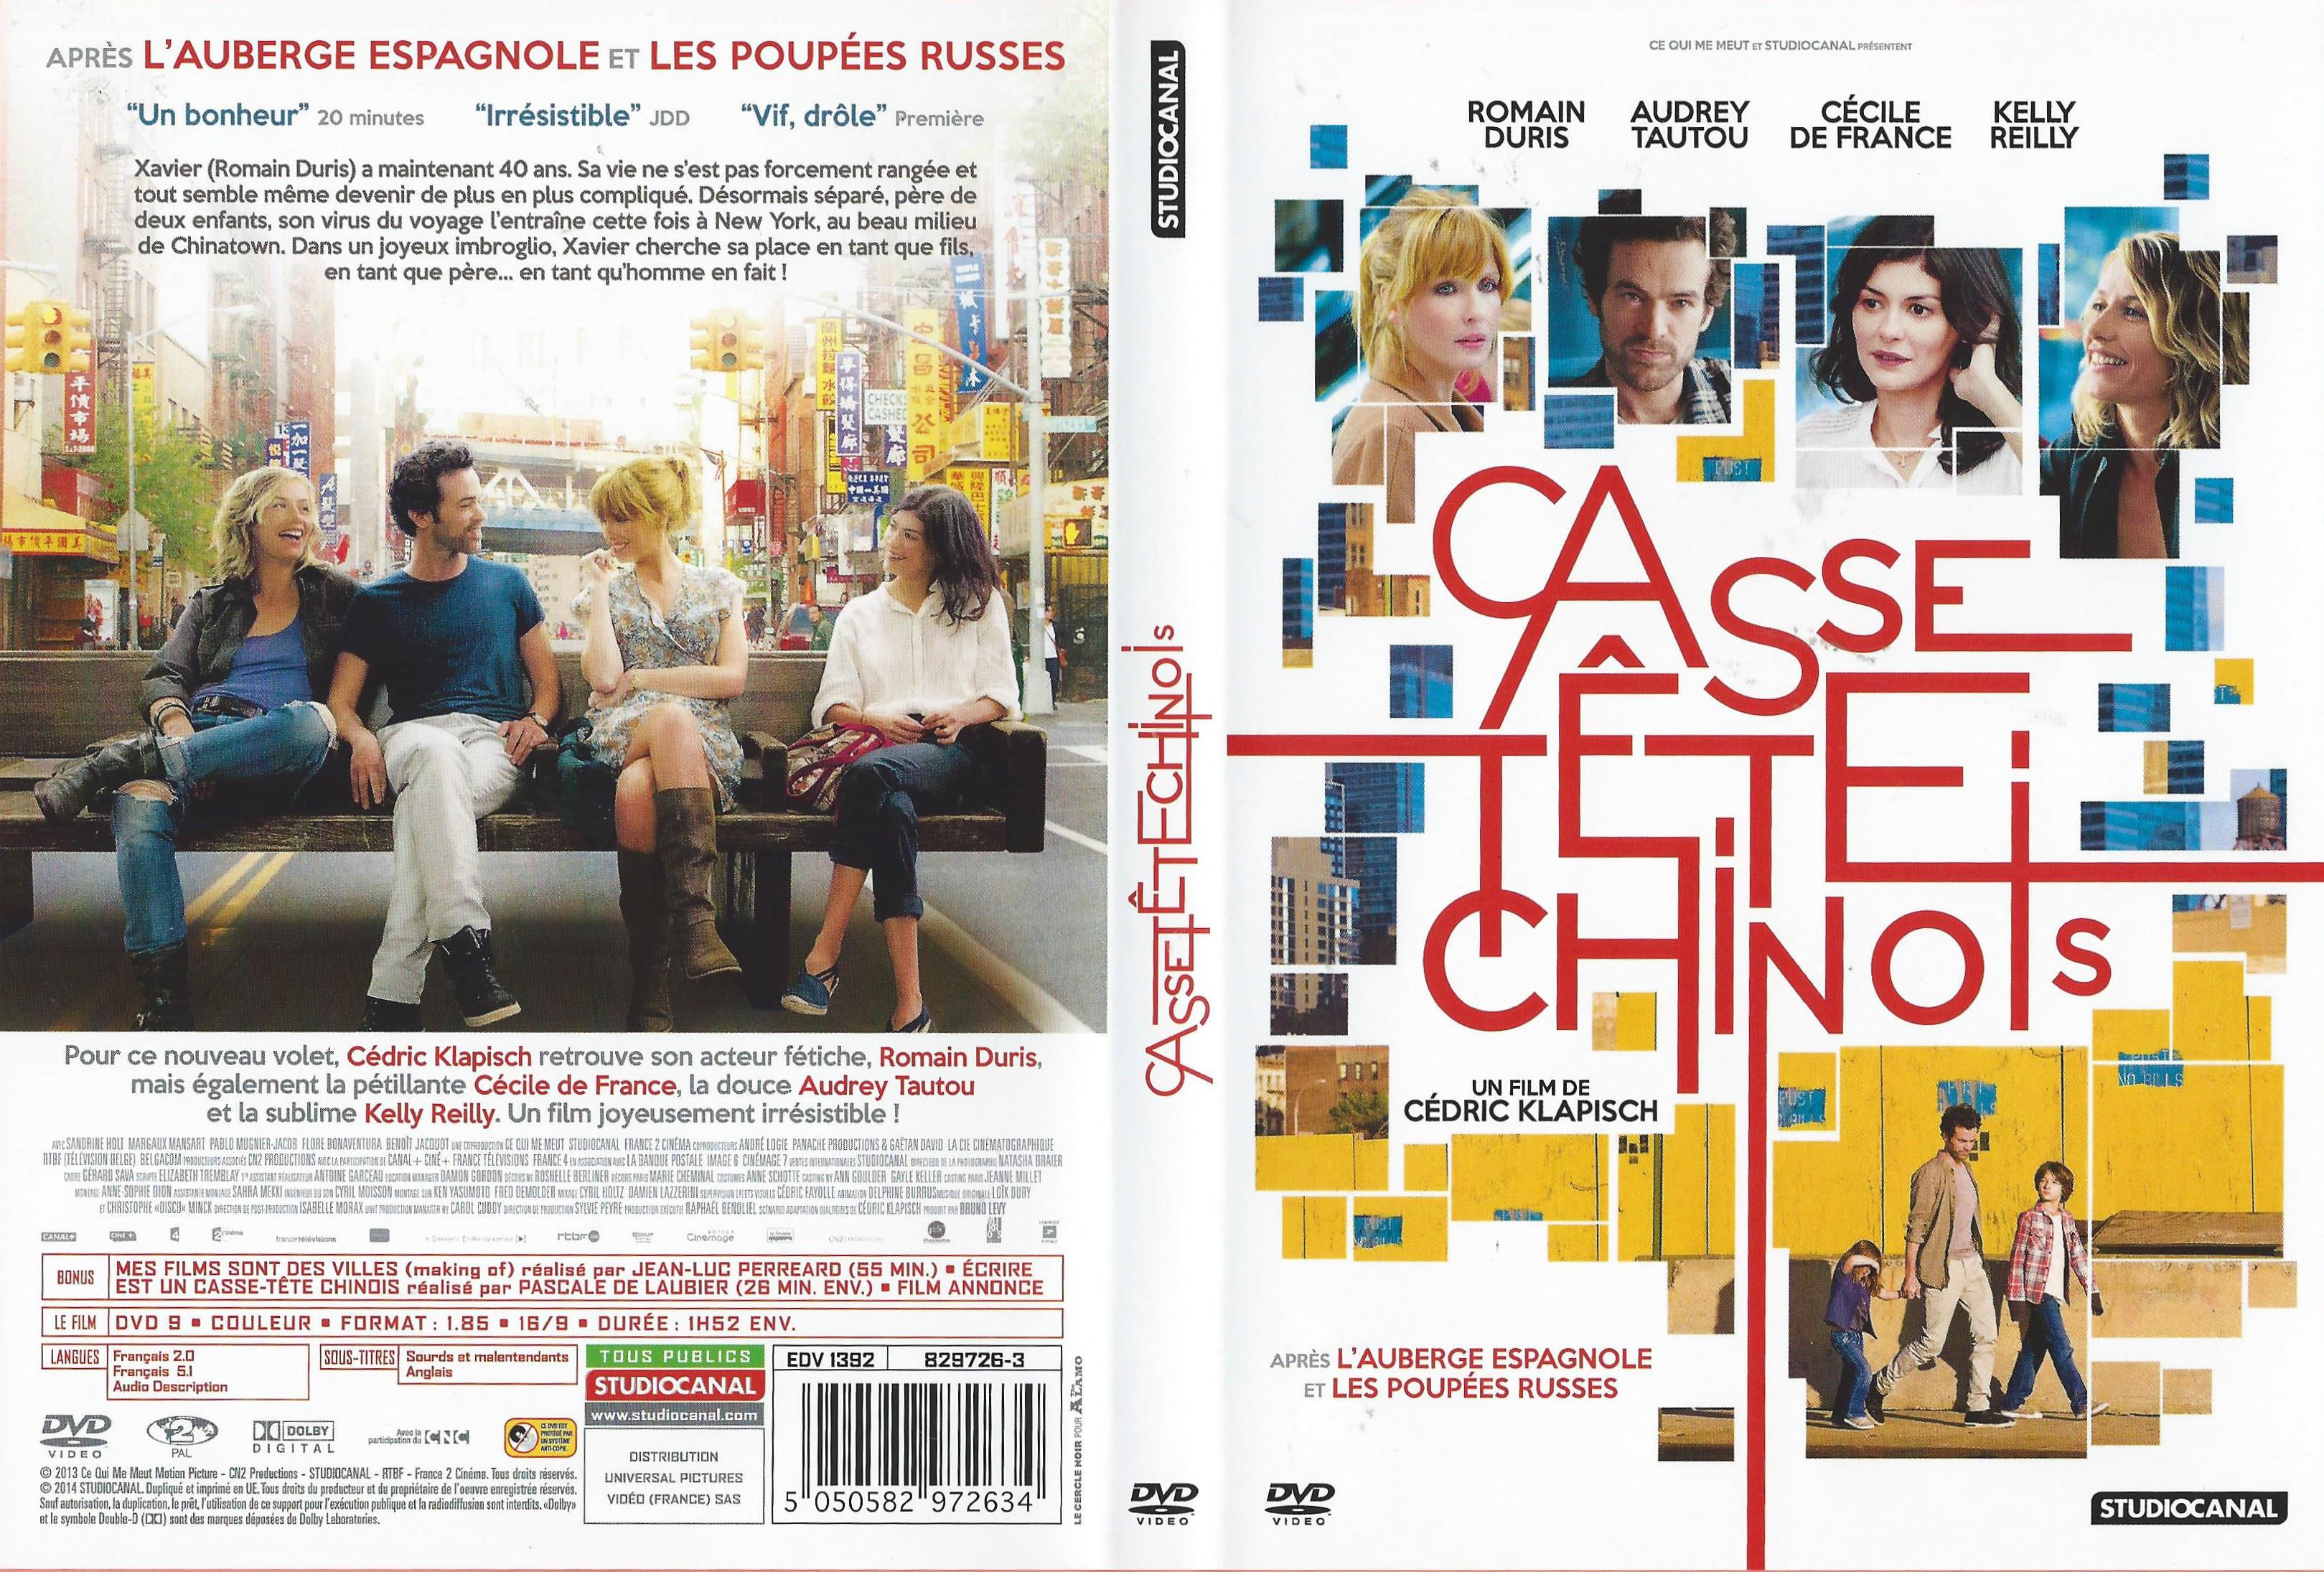 Jaquette DVD Casse-tte chinois v2